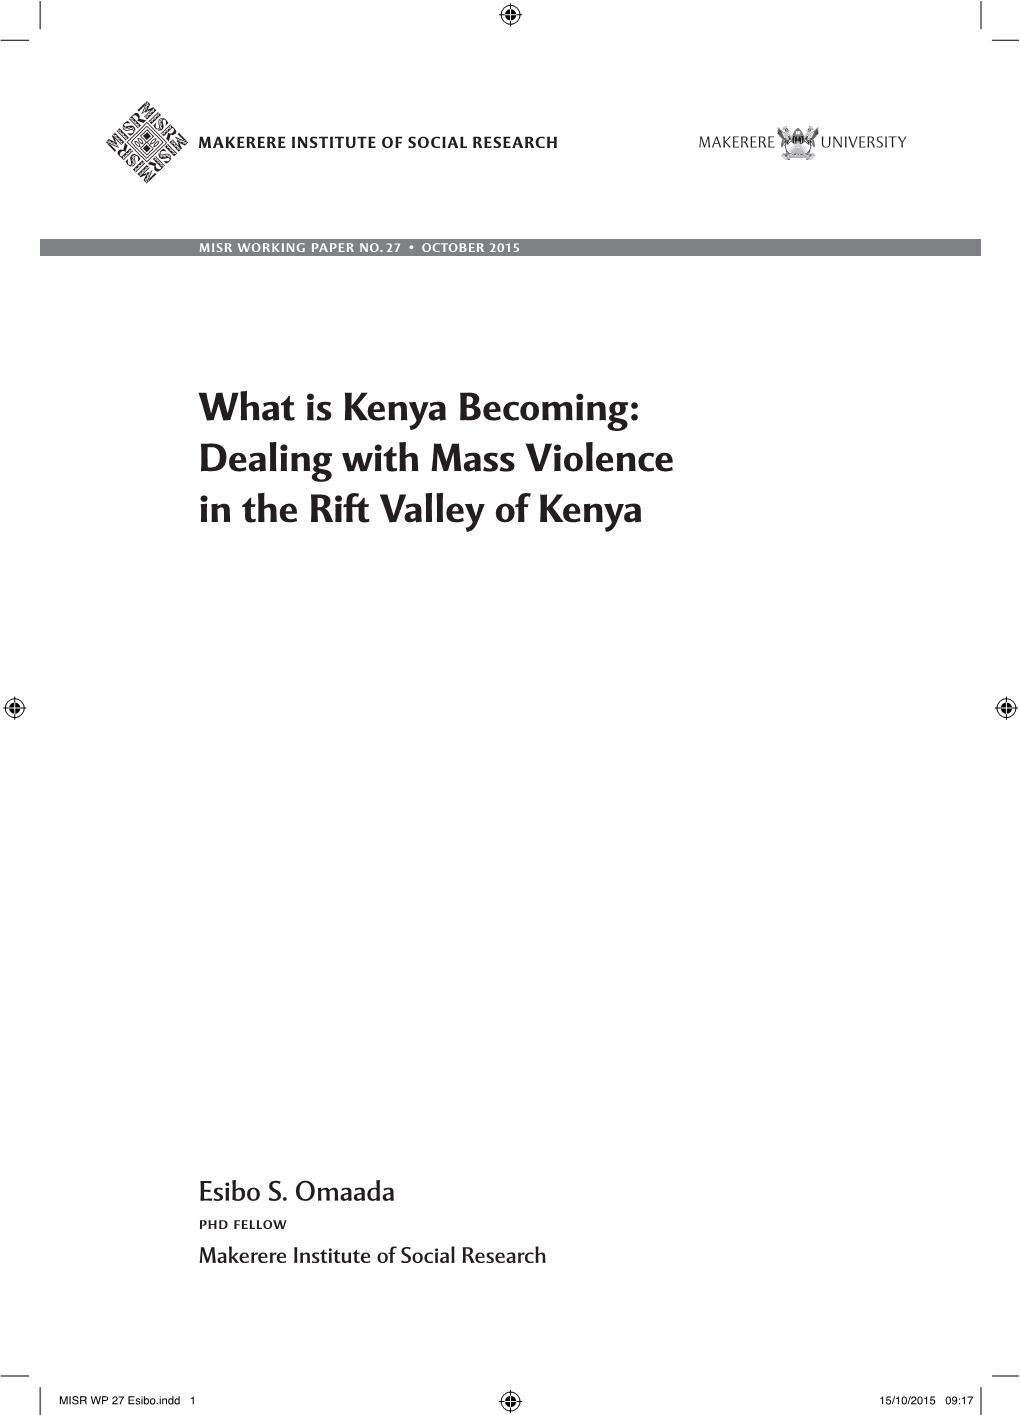 What Is Kenya Becoming: Dealing with Mass Violence in the Rift Valley of Kenya